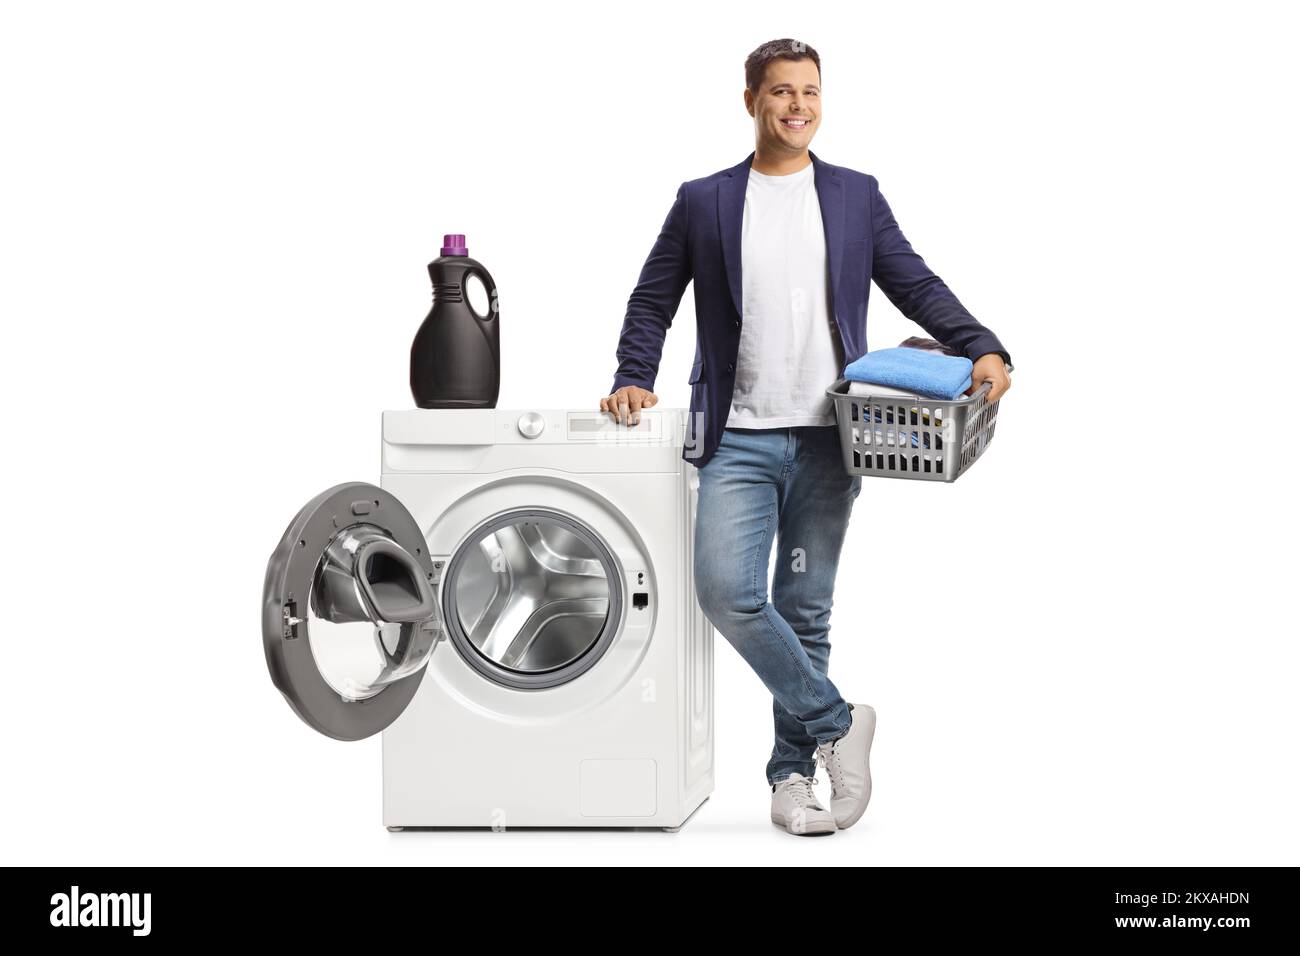 Young man leaning on a washing machine and holding a basket with clothes isolated on white background Stock Photo